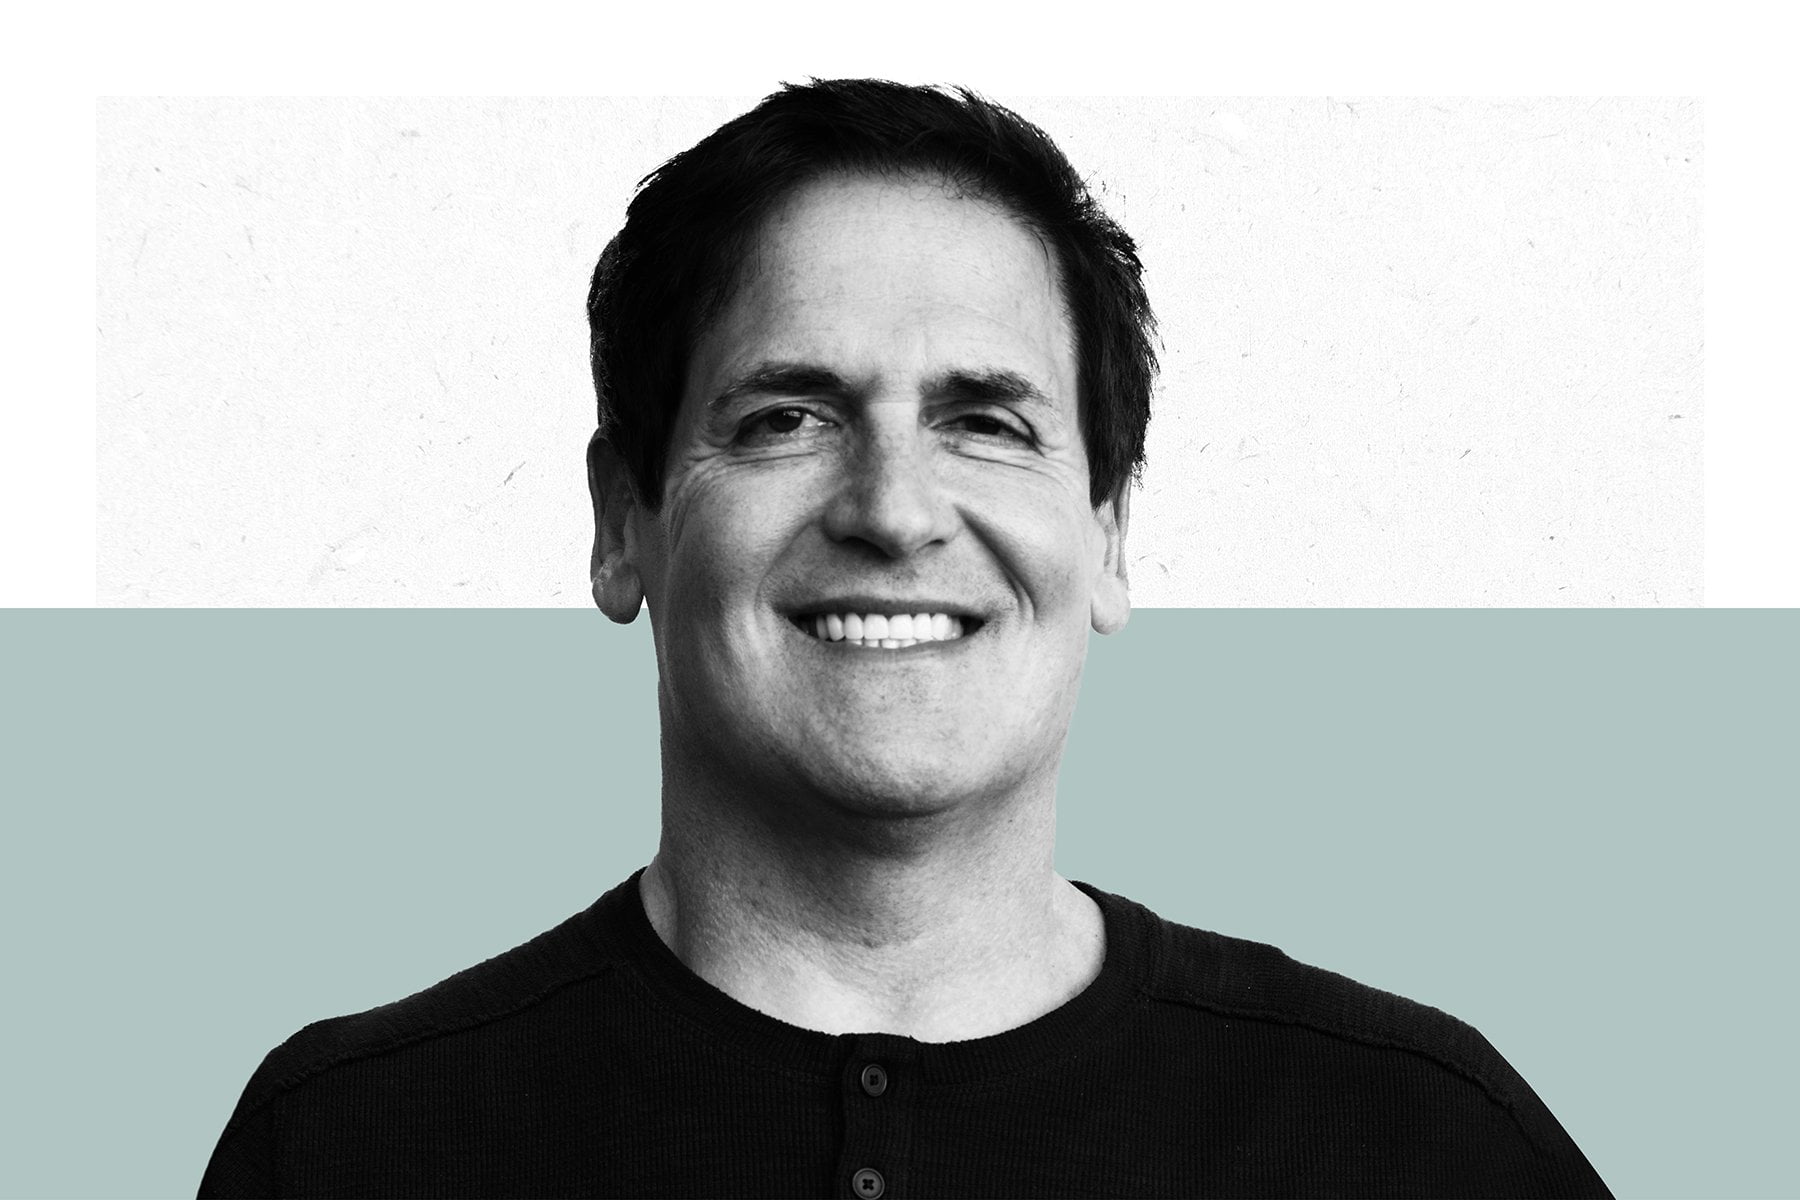 Billionaire Mark Cuban Reveals Two Altcoin Investments "all hands" my - What projects are those?